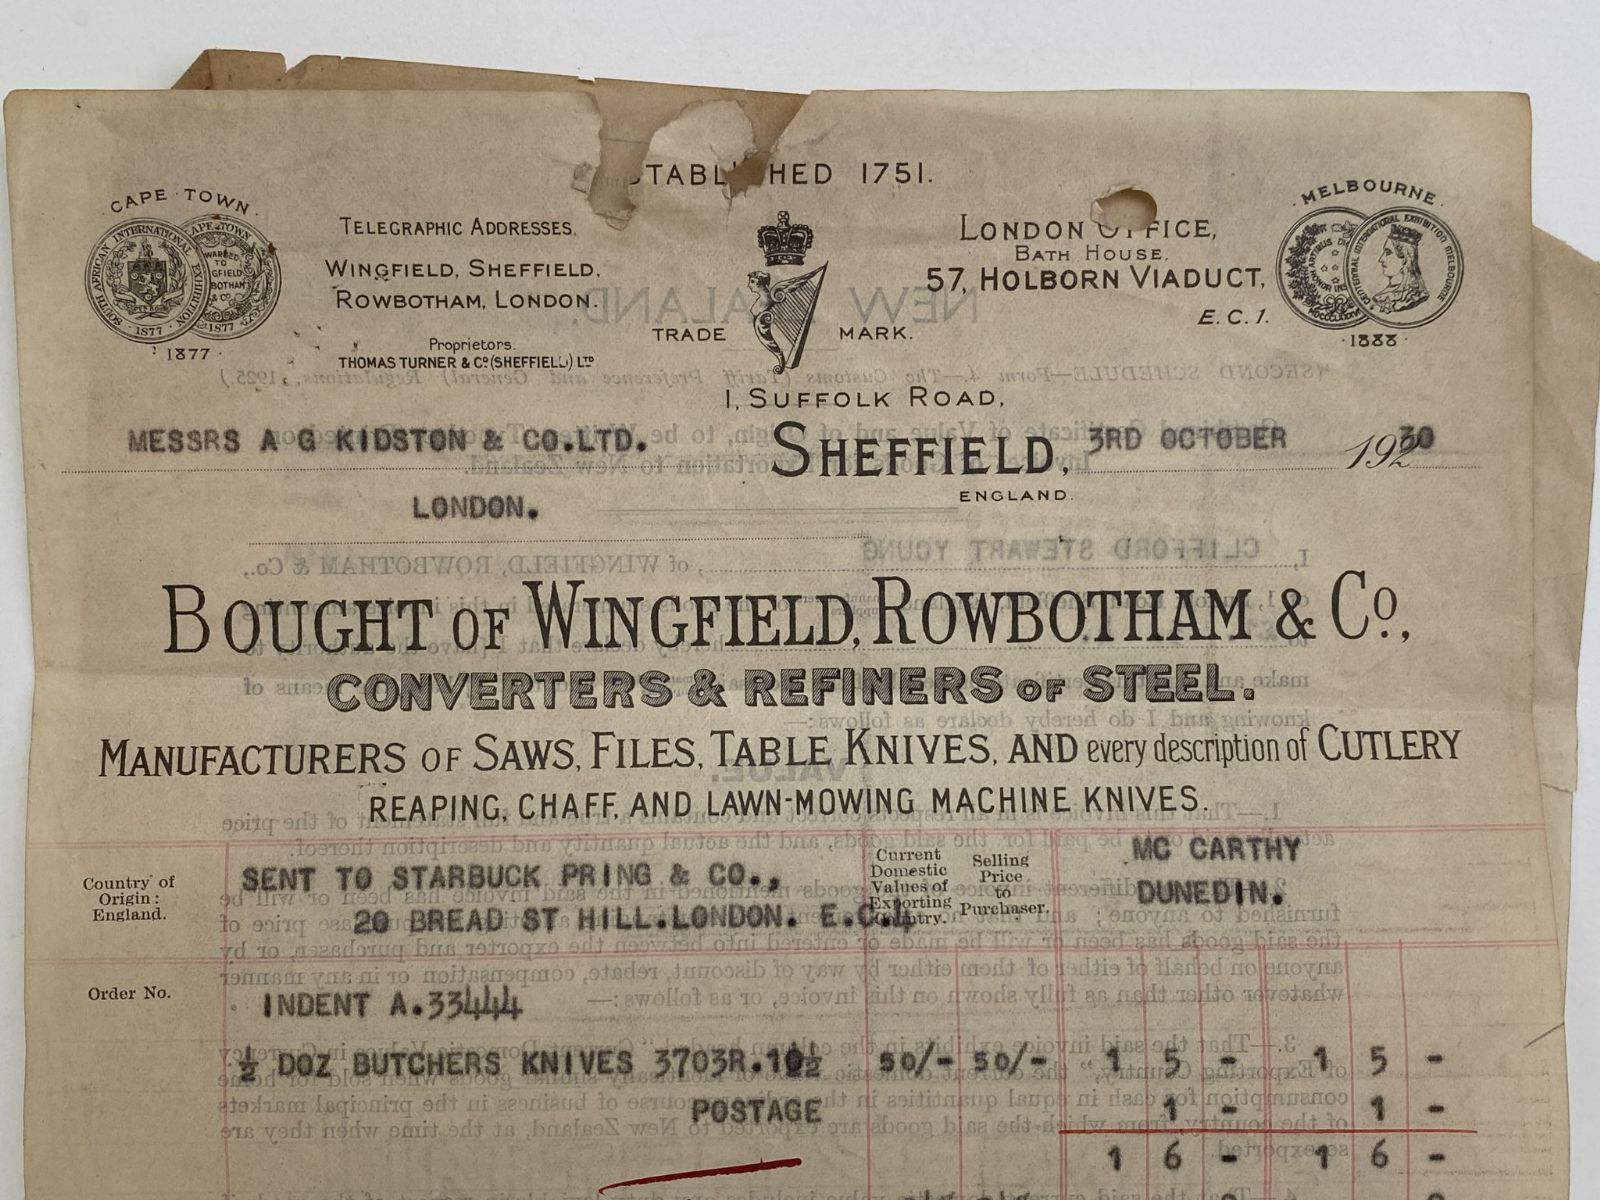 OLD INVOICE: Bought of Wingfield, Rowbotham & Co. London - Steel Refiners 1930